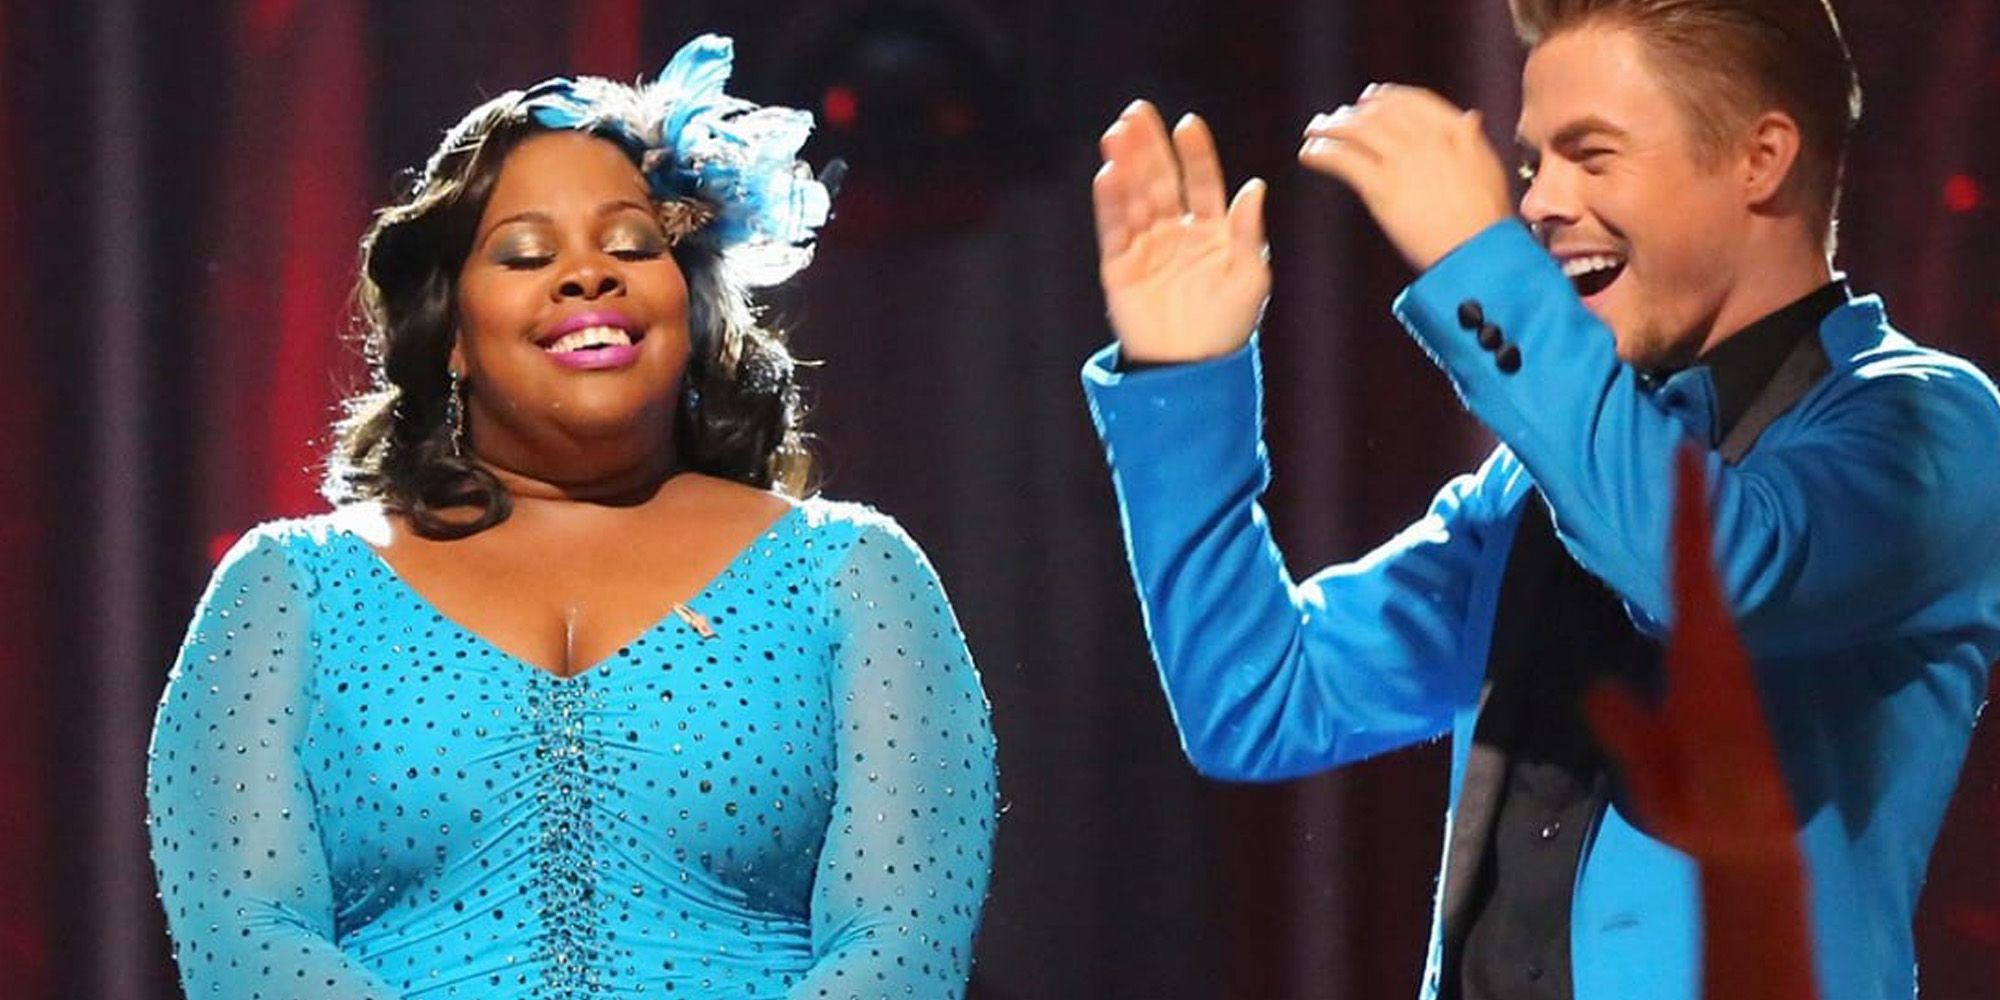 amber riley entry dancing with the stars